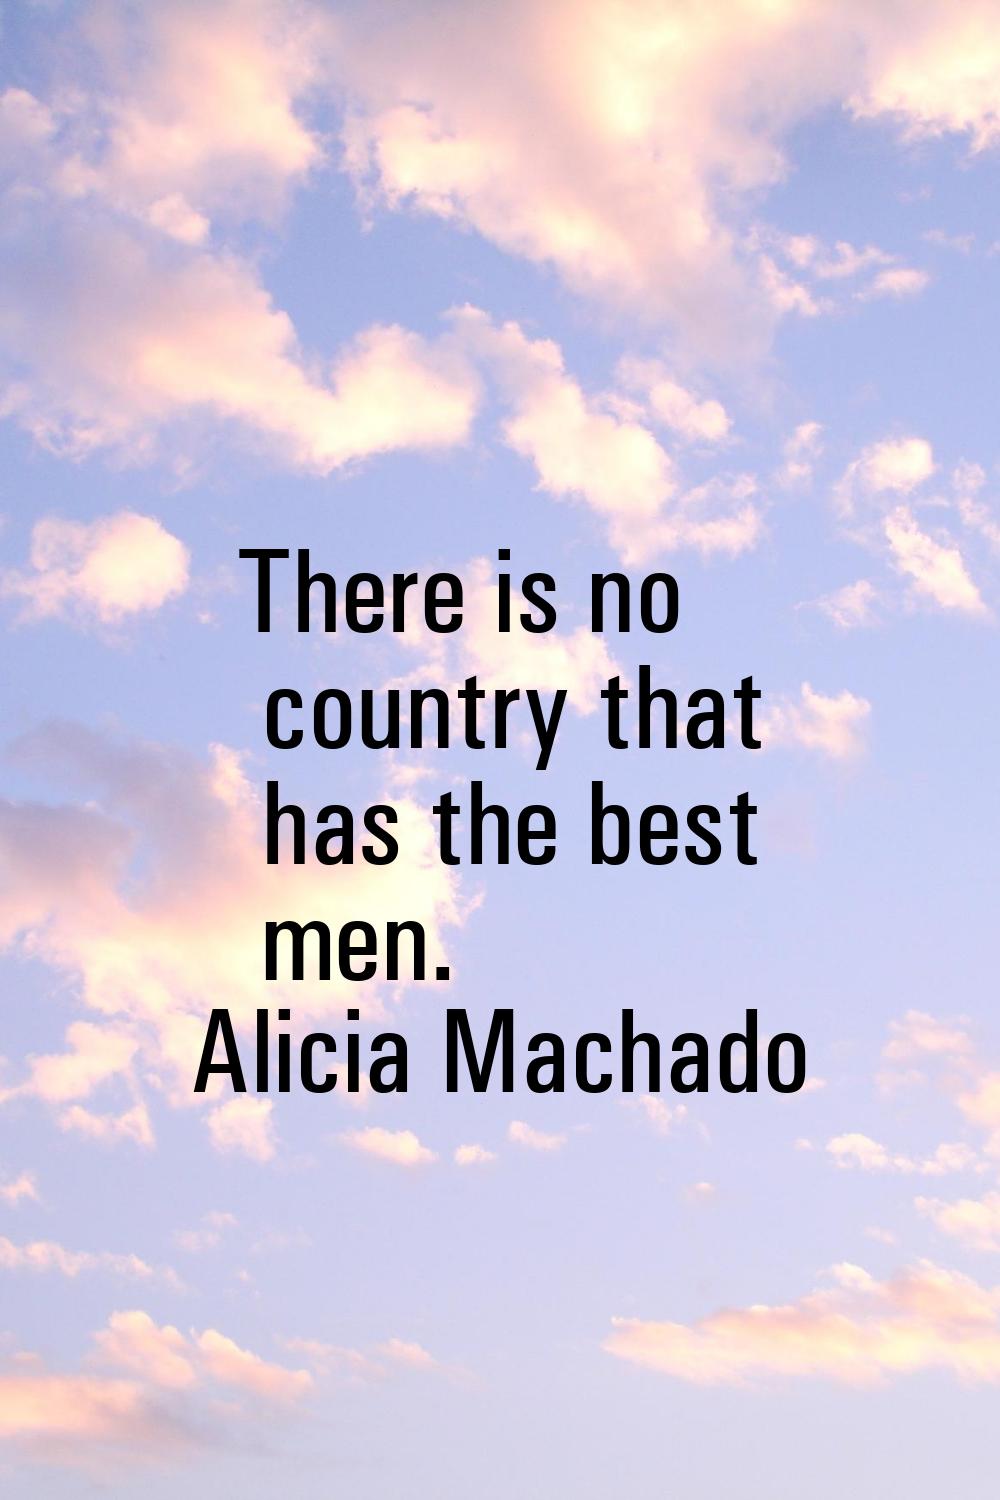 There is no country that has the best men.